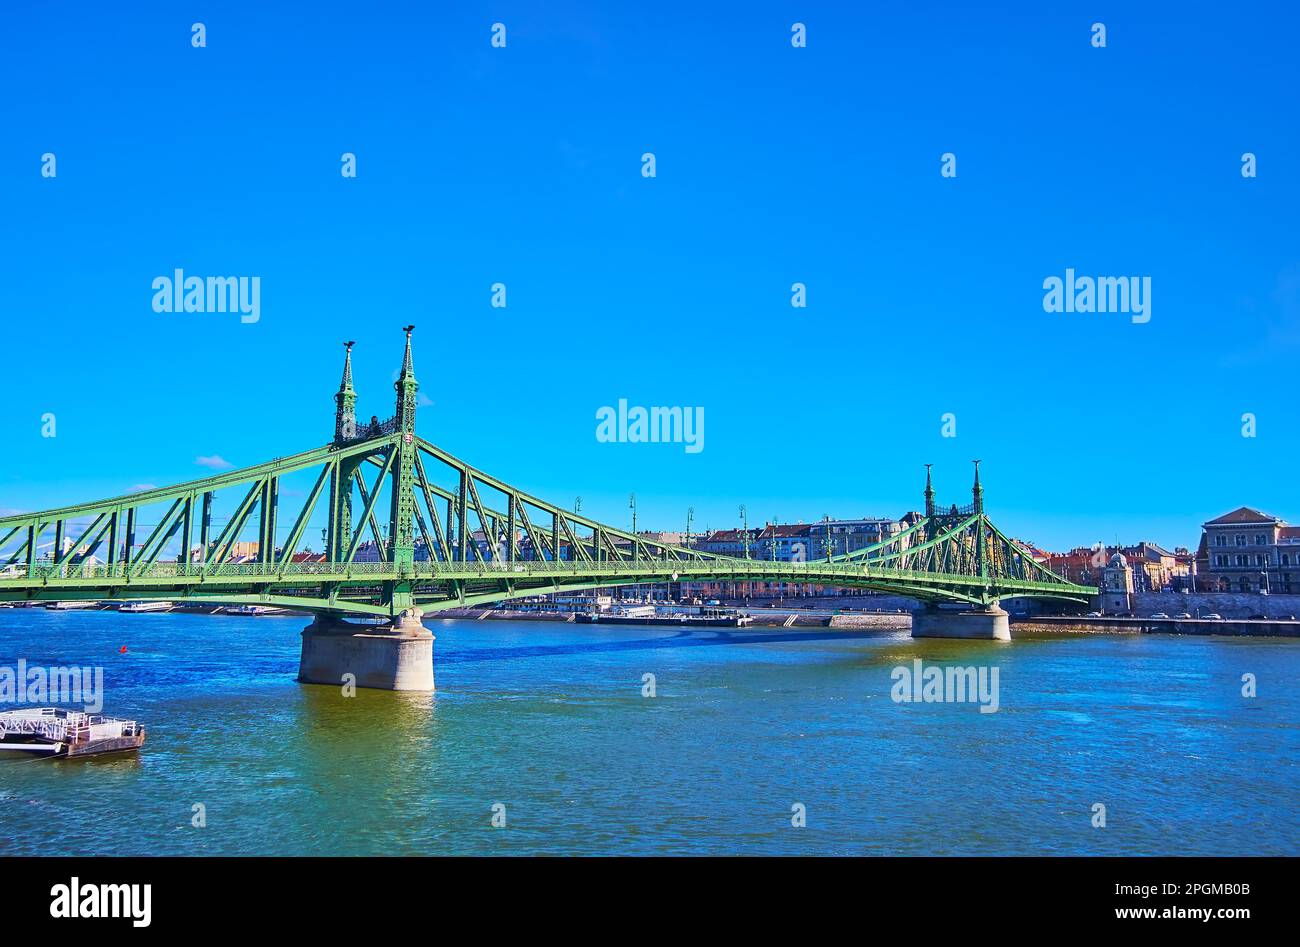 The picturesque Liberty Bridge, stretching across Danube River with a view on historic building of Corvinus University on the opposite river's bank, B Stock Photo